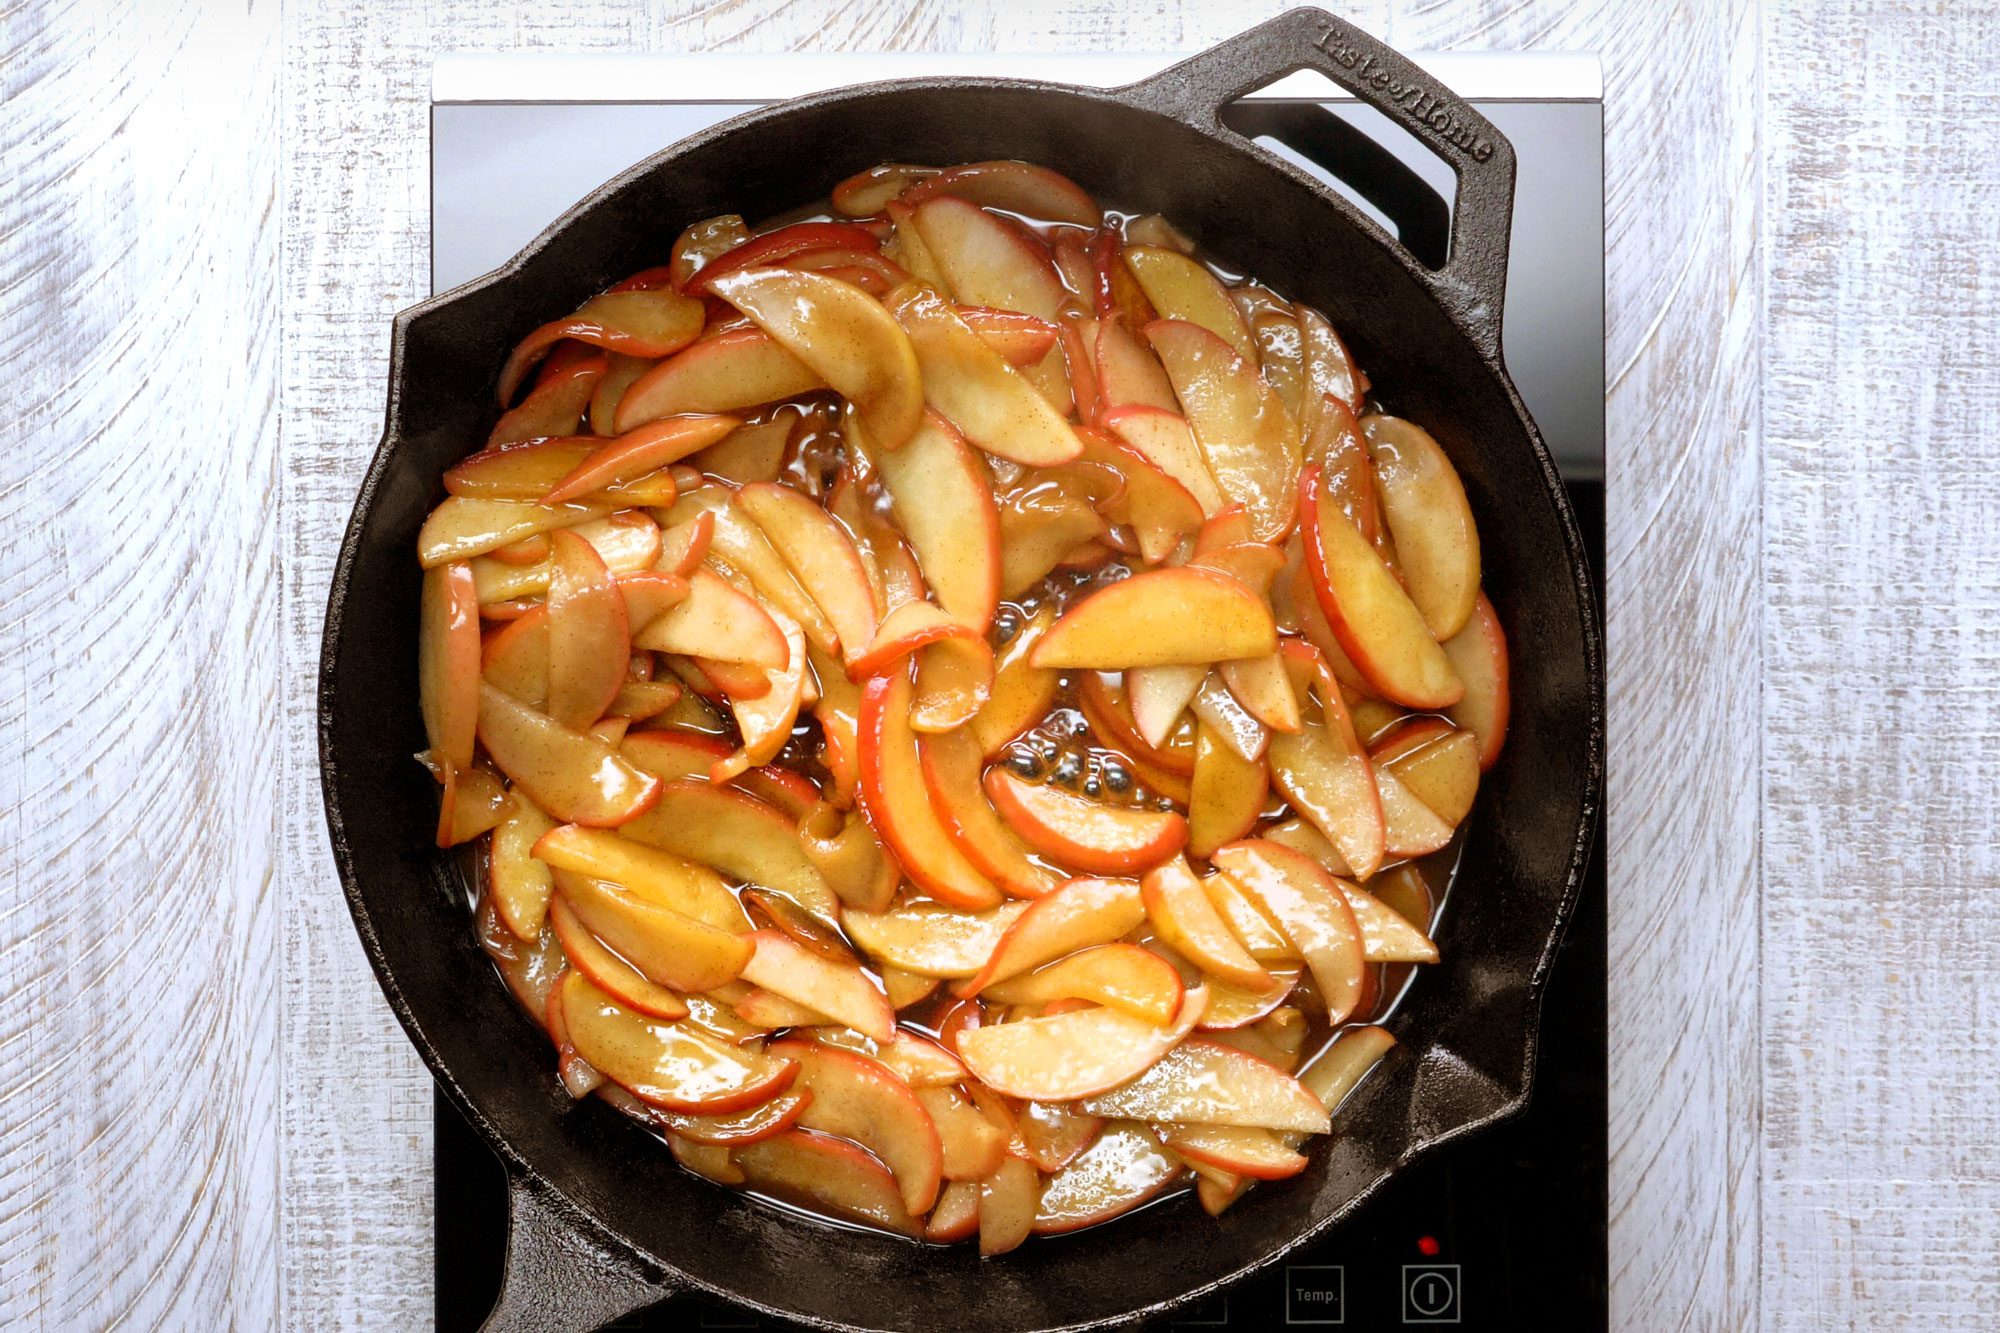 Overhead shot of fried apples in a large cast-iron skillet on wooden background